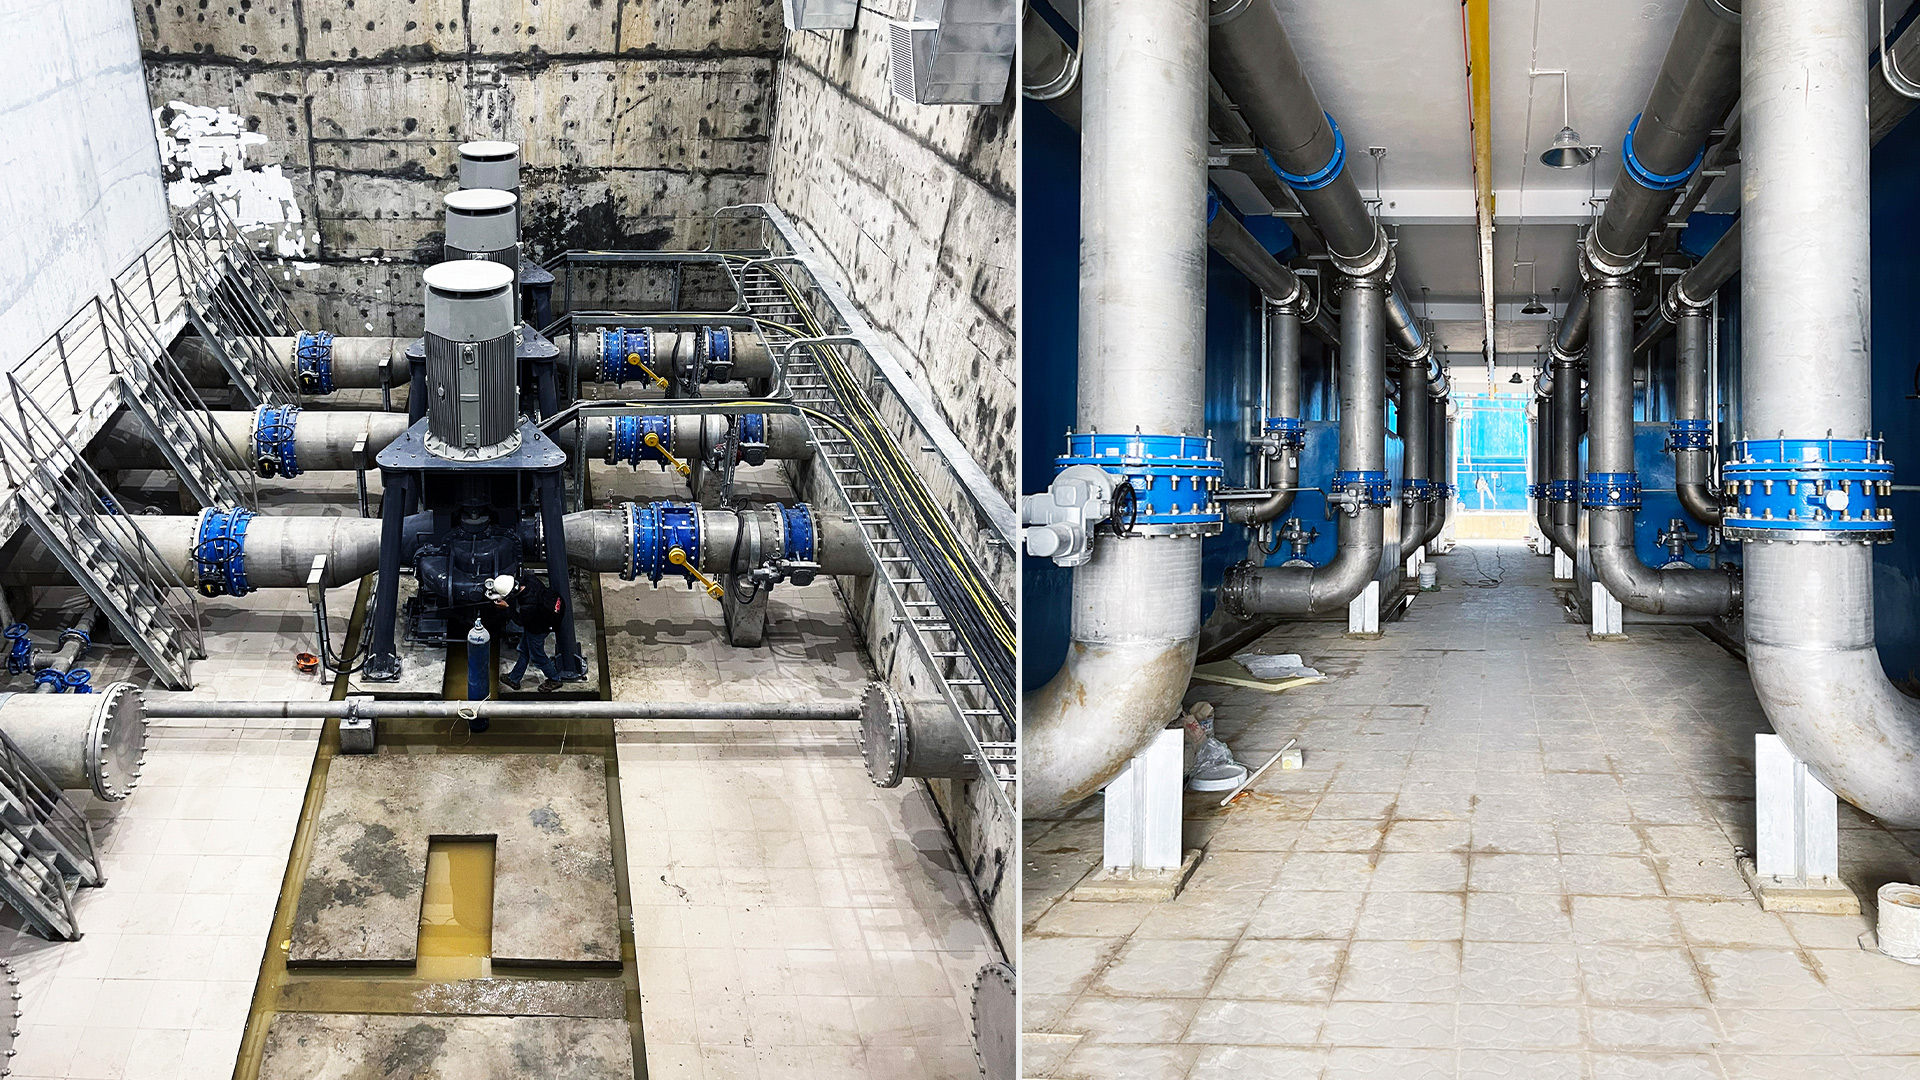 Blue AVK valves installed at the Hoa Lien wastewater treatment plant in Vietnam